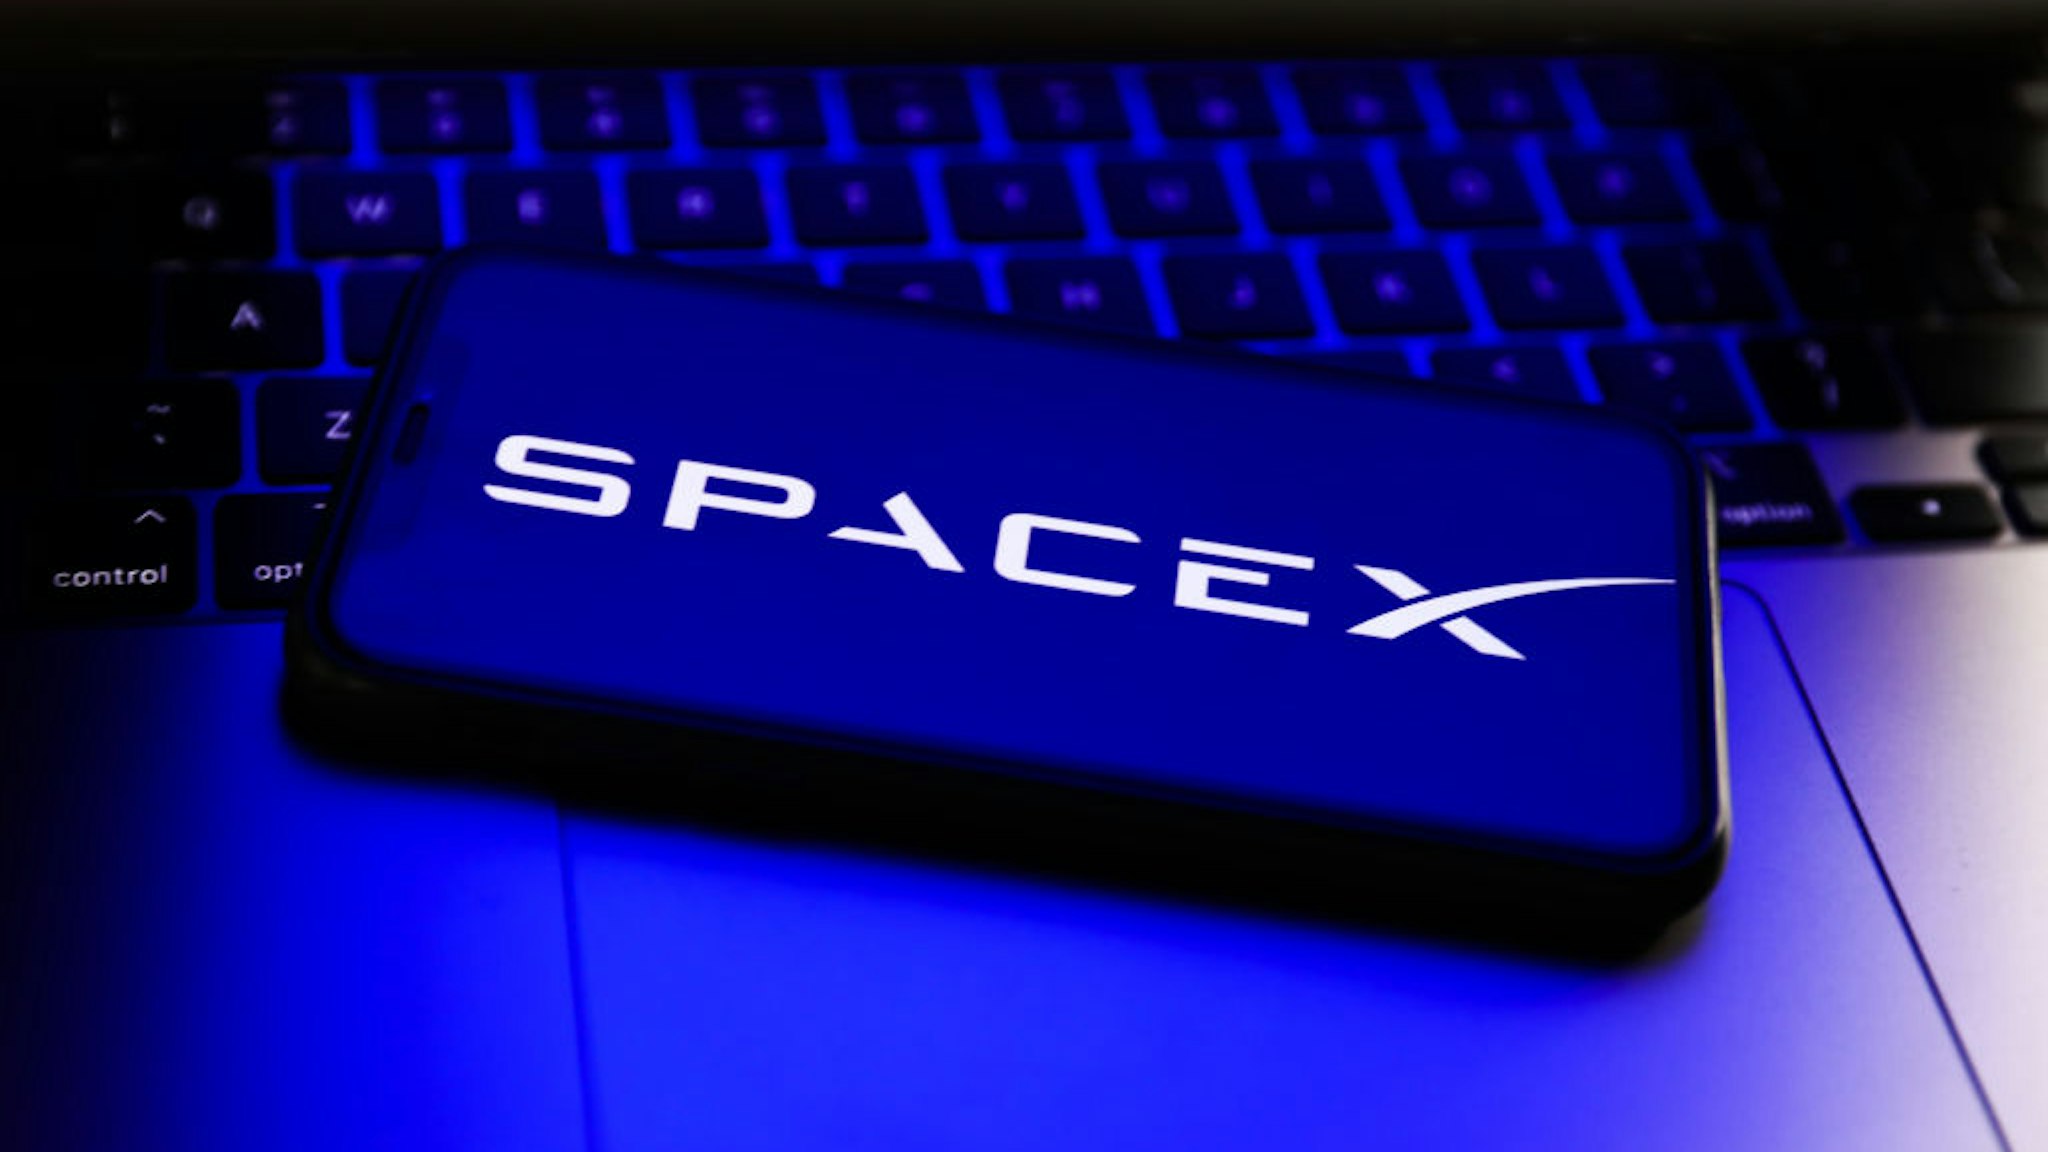 SpaceX logo displayed on a phone screen and a laptop keyboard are seen in this illustration photo taken in Poland on April 24, 2022. (Photo illustration by Jakub Porzycki/NurPhoto via Getty Images)